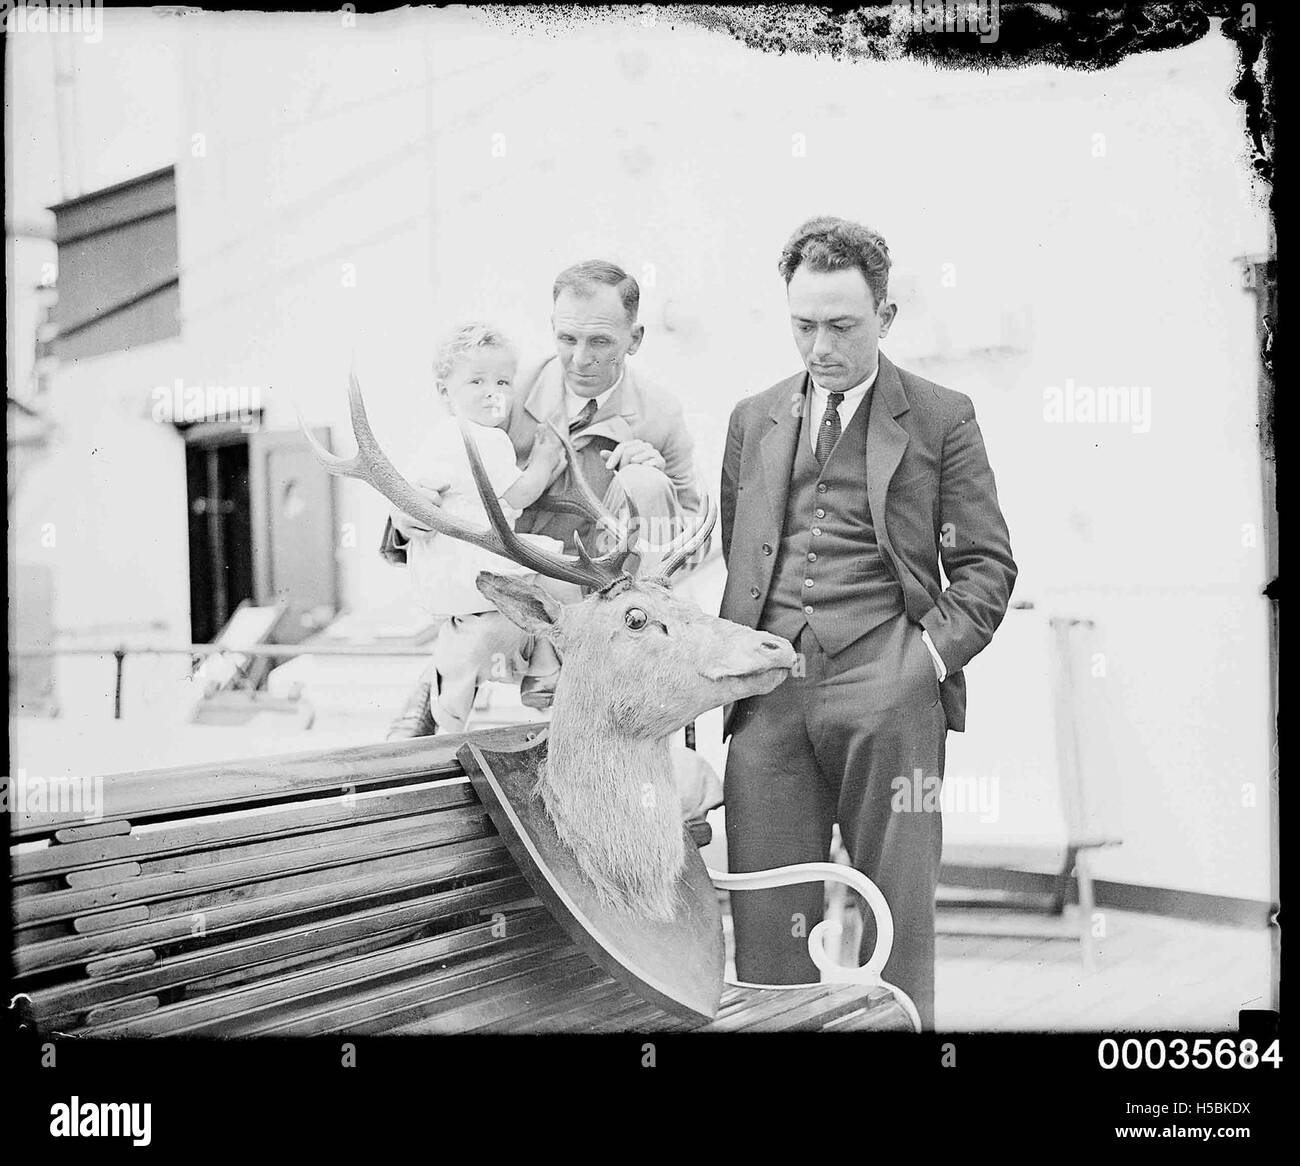 Two men and a child looking at a mounted deer head on board SS ORUNGAL, c 1930 Stock Photo